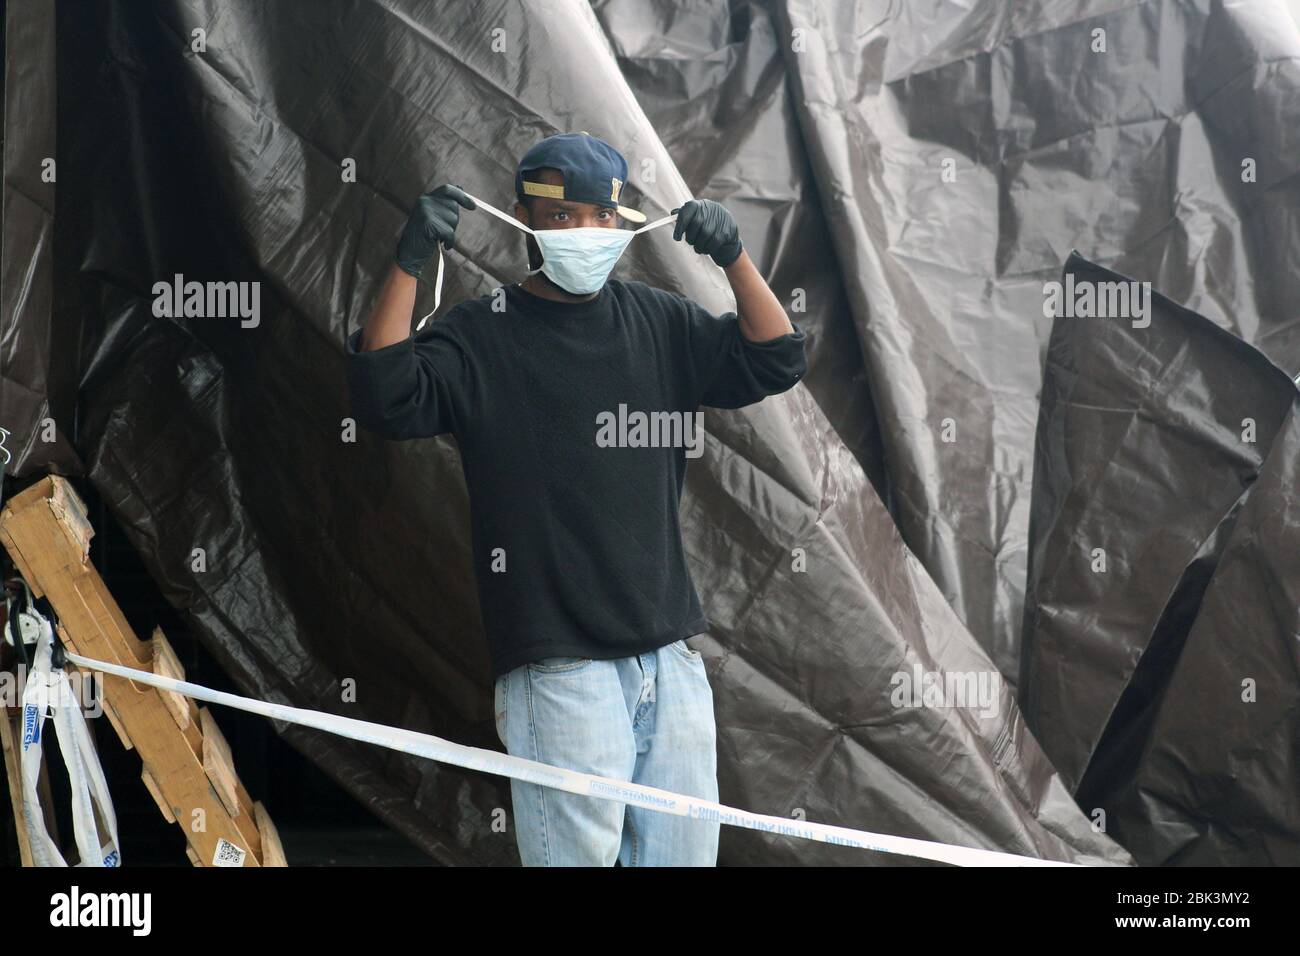 April 30, 2020, New York, New York, USA: Gloved hands, a worker adjusts his protective mask along a brown tarp set up at the entrance of the Andrew T. Cleckley Funeral Home in Brooklyn where bodies non properly cared are removed. 60 corpses were stored in 4 non-refregerated vehiciles lining the street nearby stores. Neighbors reported a foul smell still persistent and fluids dripping from the trucks. The funeral home was overwhelmed by COVID-19 deaths, waiting for weeks for cremations in New York. (Credit Image: © Marie Le Ble/ZUMA Wire) Stock Photo